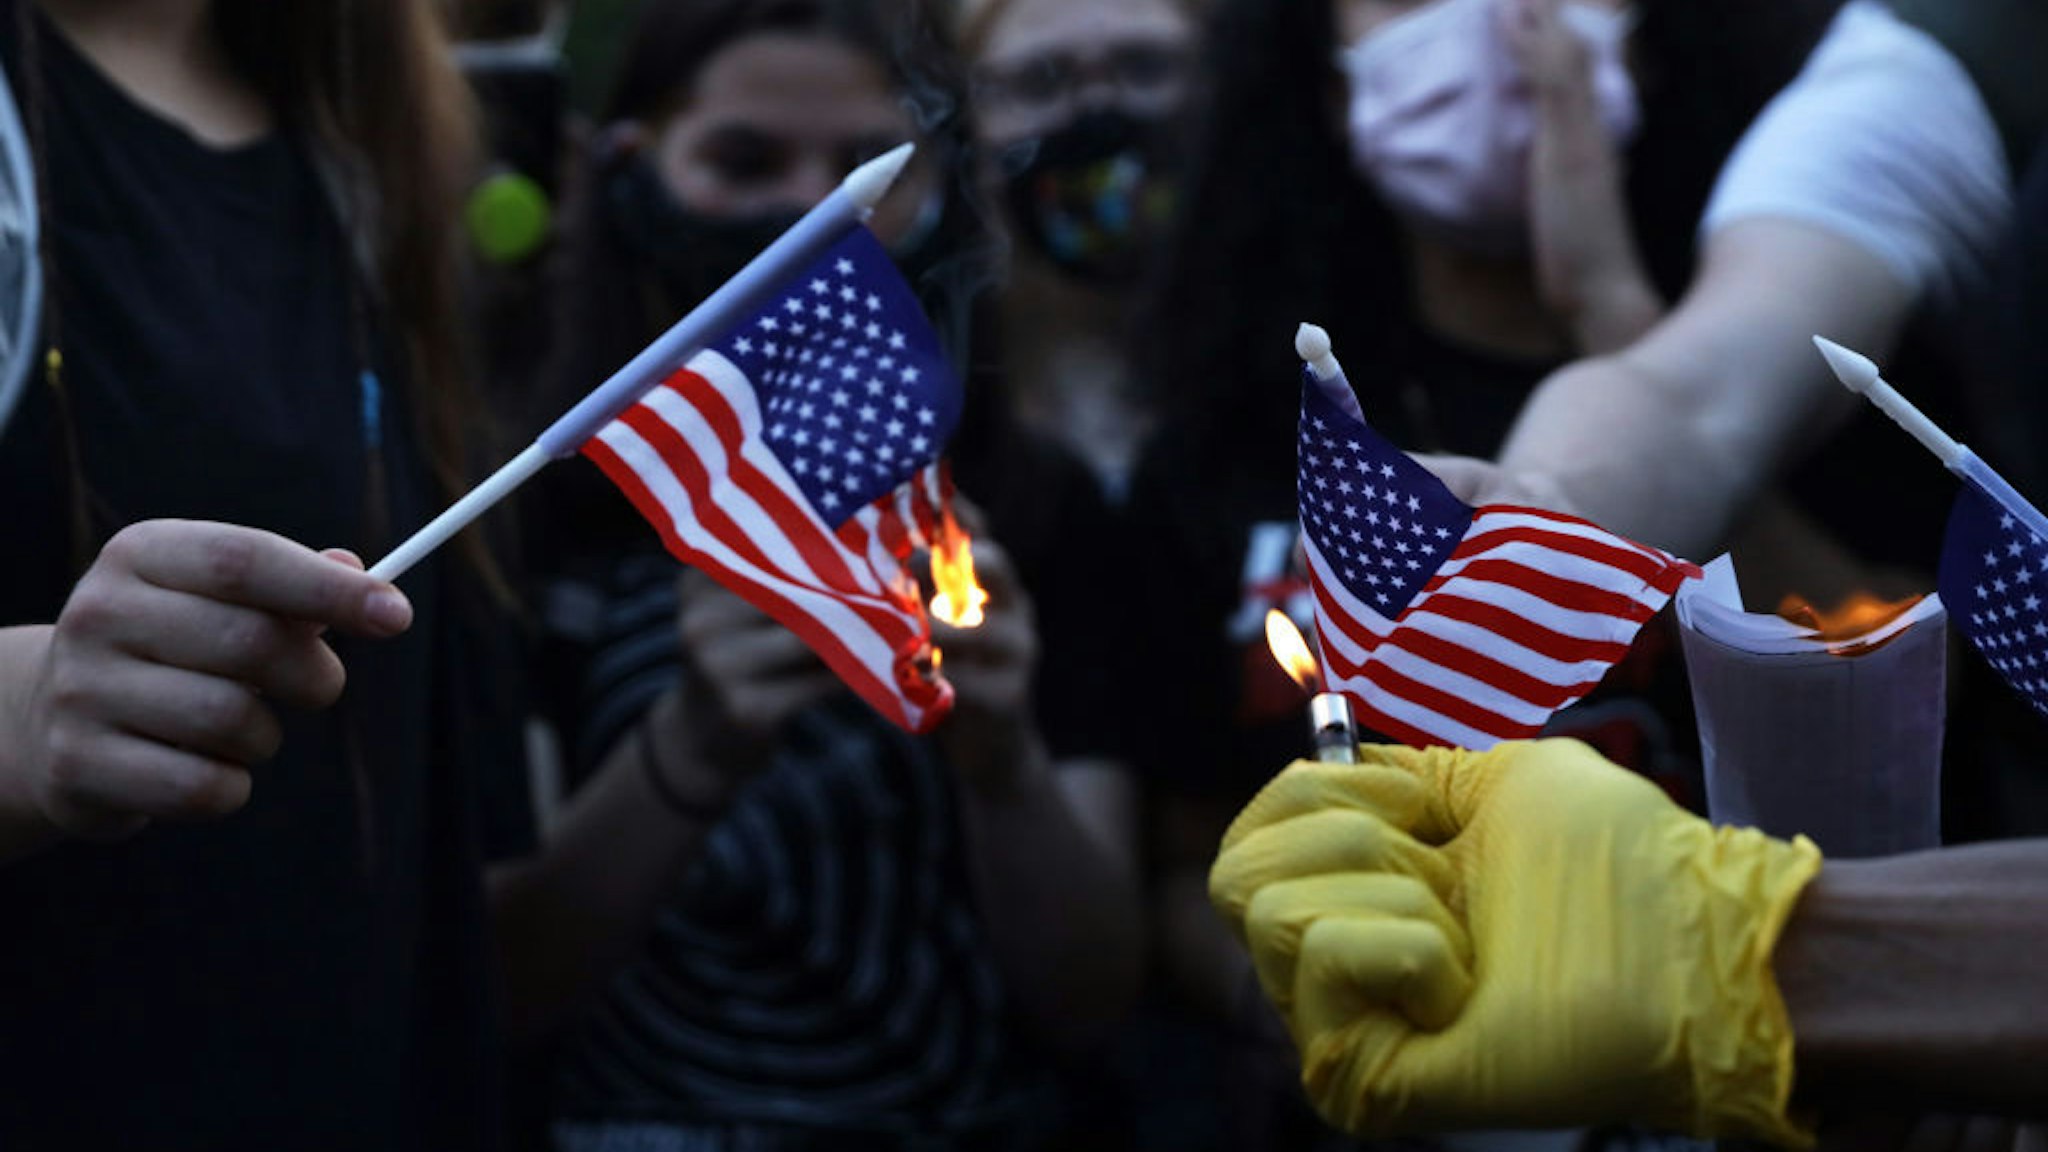 Anti-Trump activists burn U.S. flags at Black Lives Matter Plaza near the White House July 4, 2020 in Washington, DC. Anti-Trump activists rallied on Independence Day to voice their disapproval of President Trump's handling in the wake of the death of George Floyd. (Photo by Alex Wong/Getty Images)